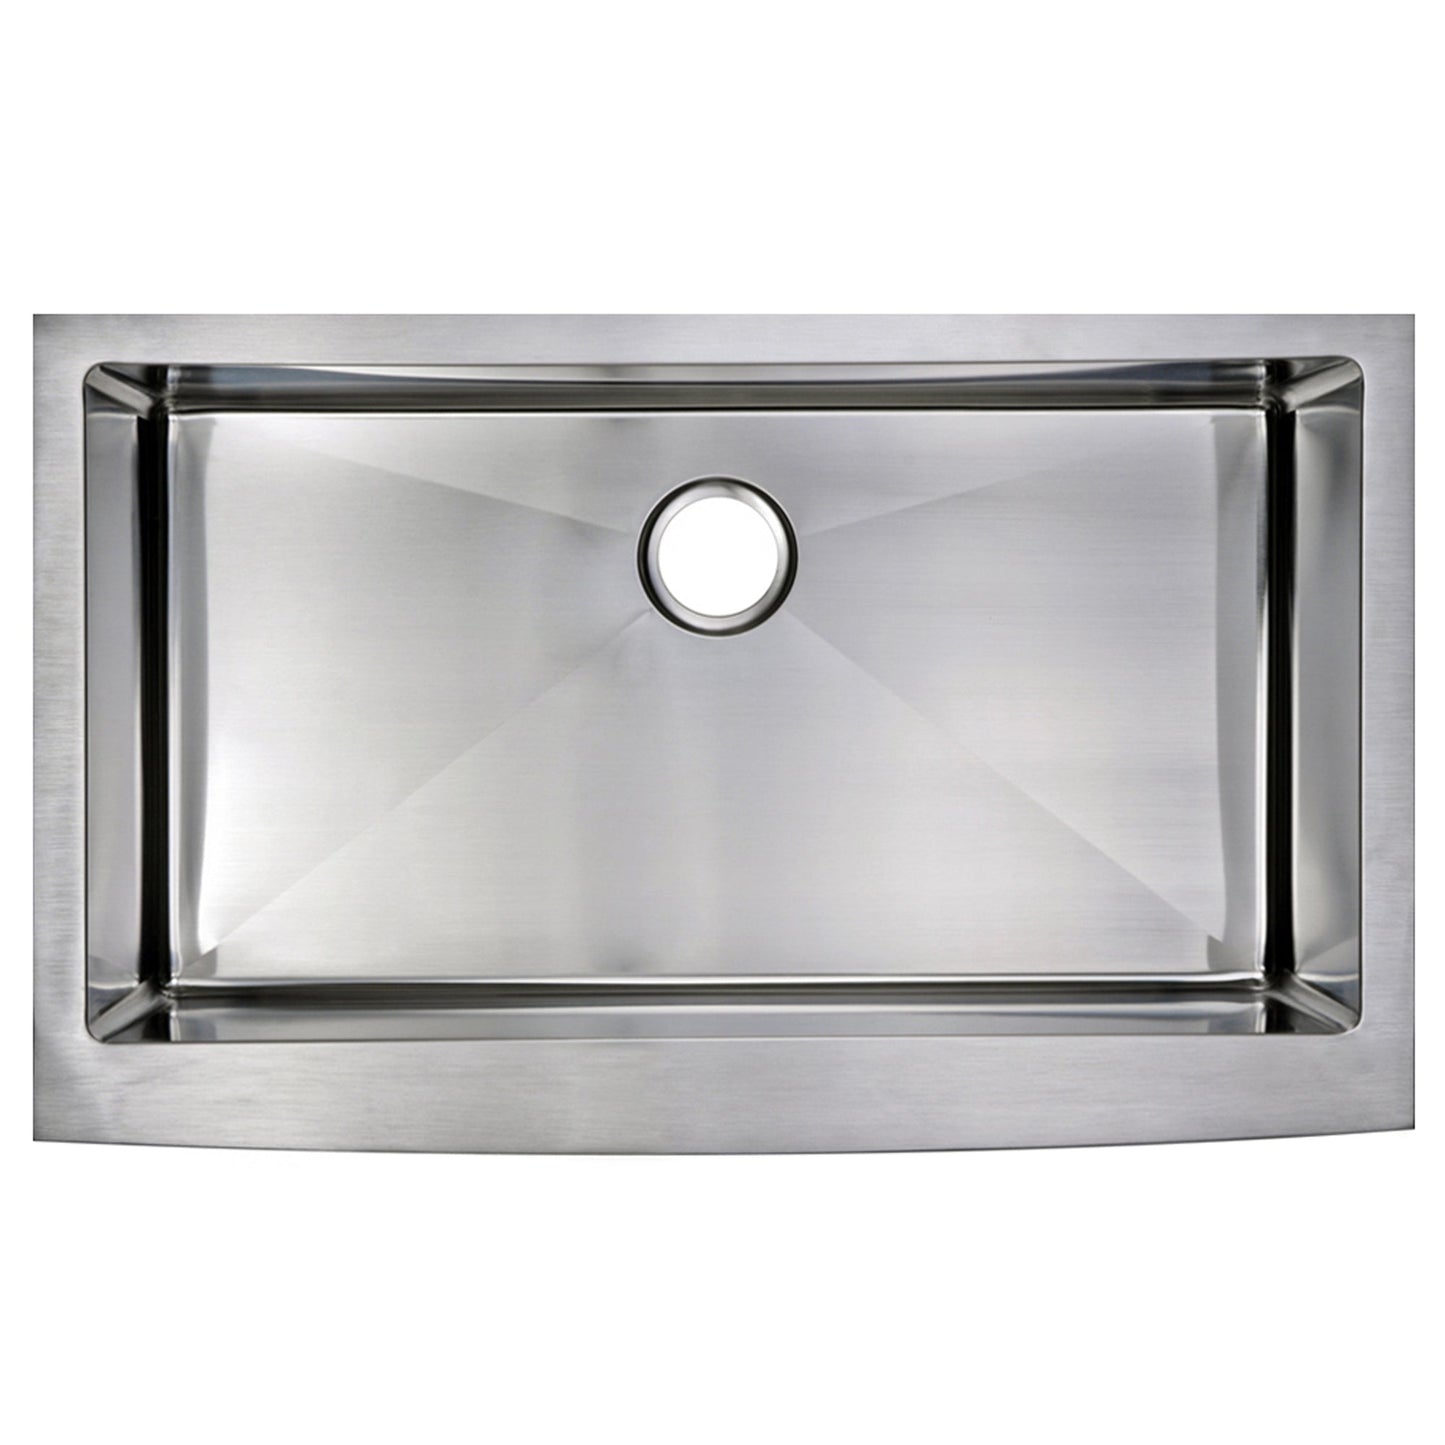 Water Creation Corner Radius Single Bowl Stainless Steel Hand Made Apron Front 36 Inch X 22 Inch Sink With Drain, Strainer, And Bottom Grid